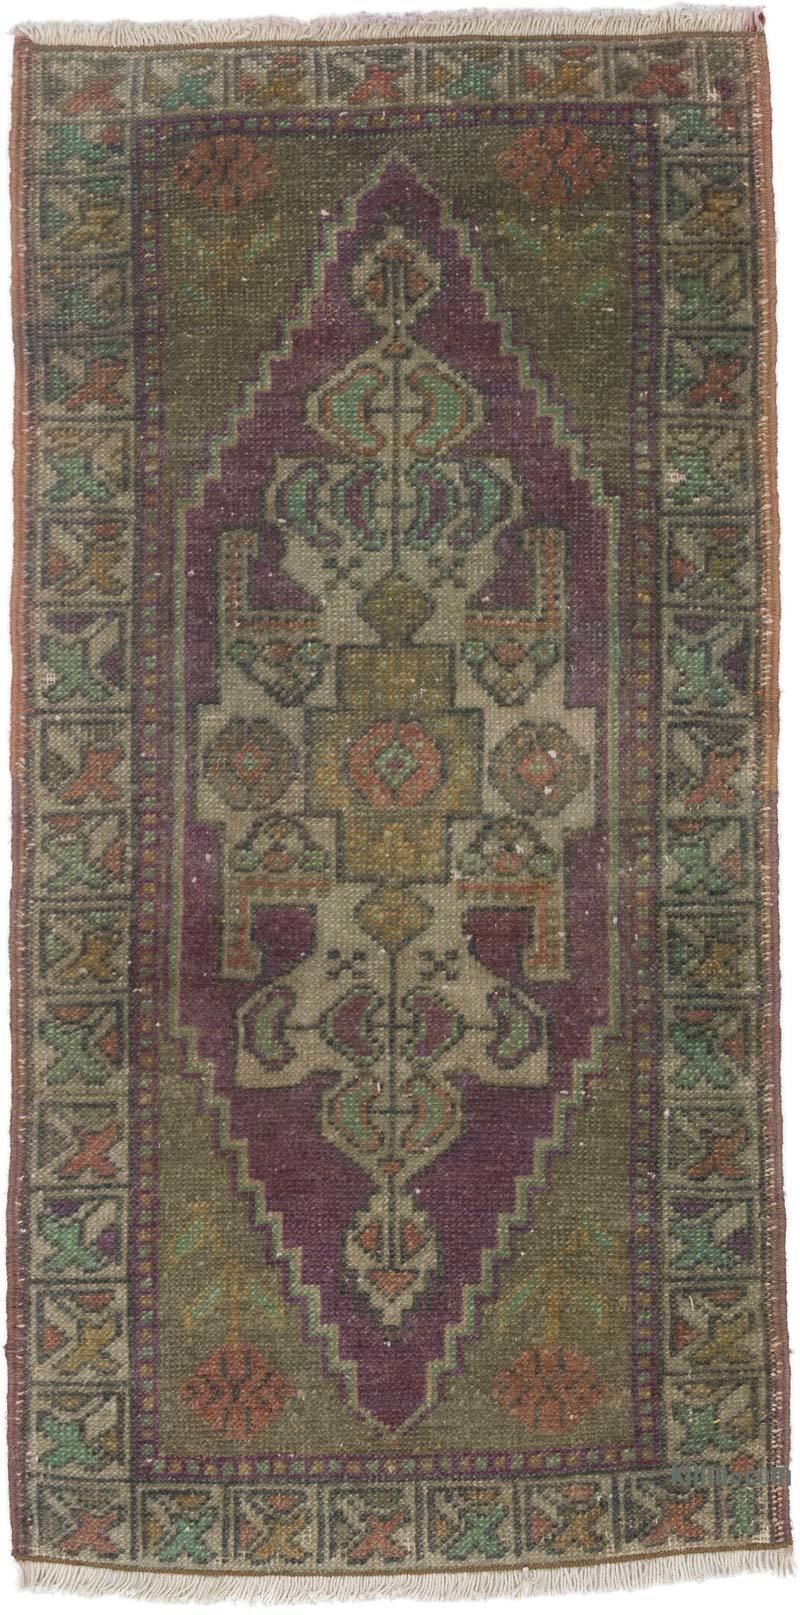 Vintage Turkish Hand-Knotted Rug - 1' 9" x 3' 4" (21 in. x 40 in.) - K0057134